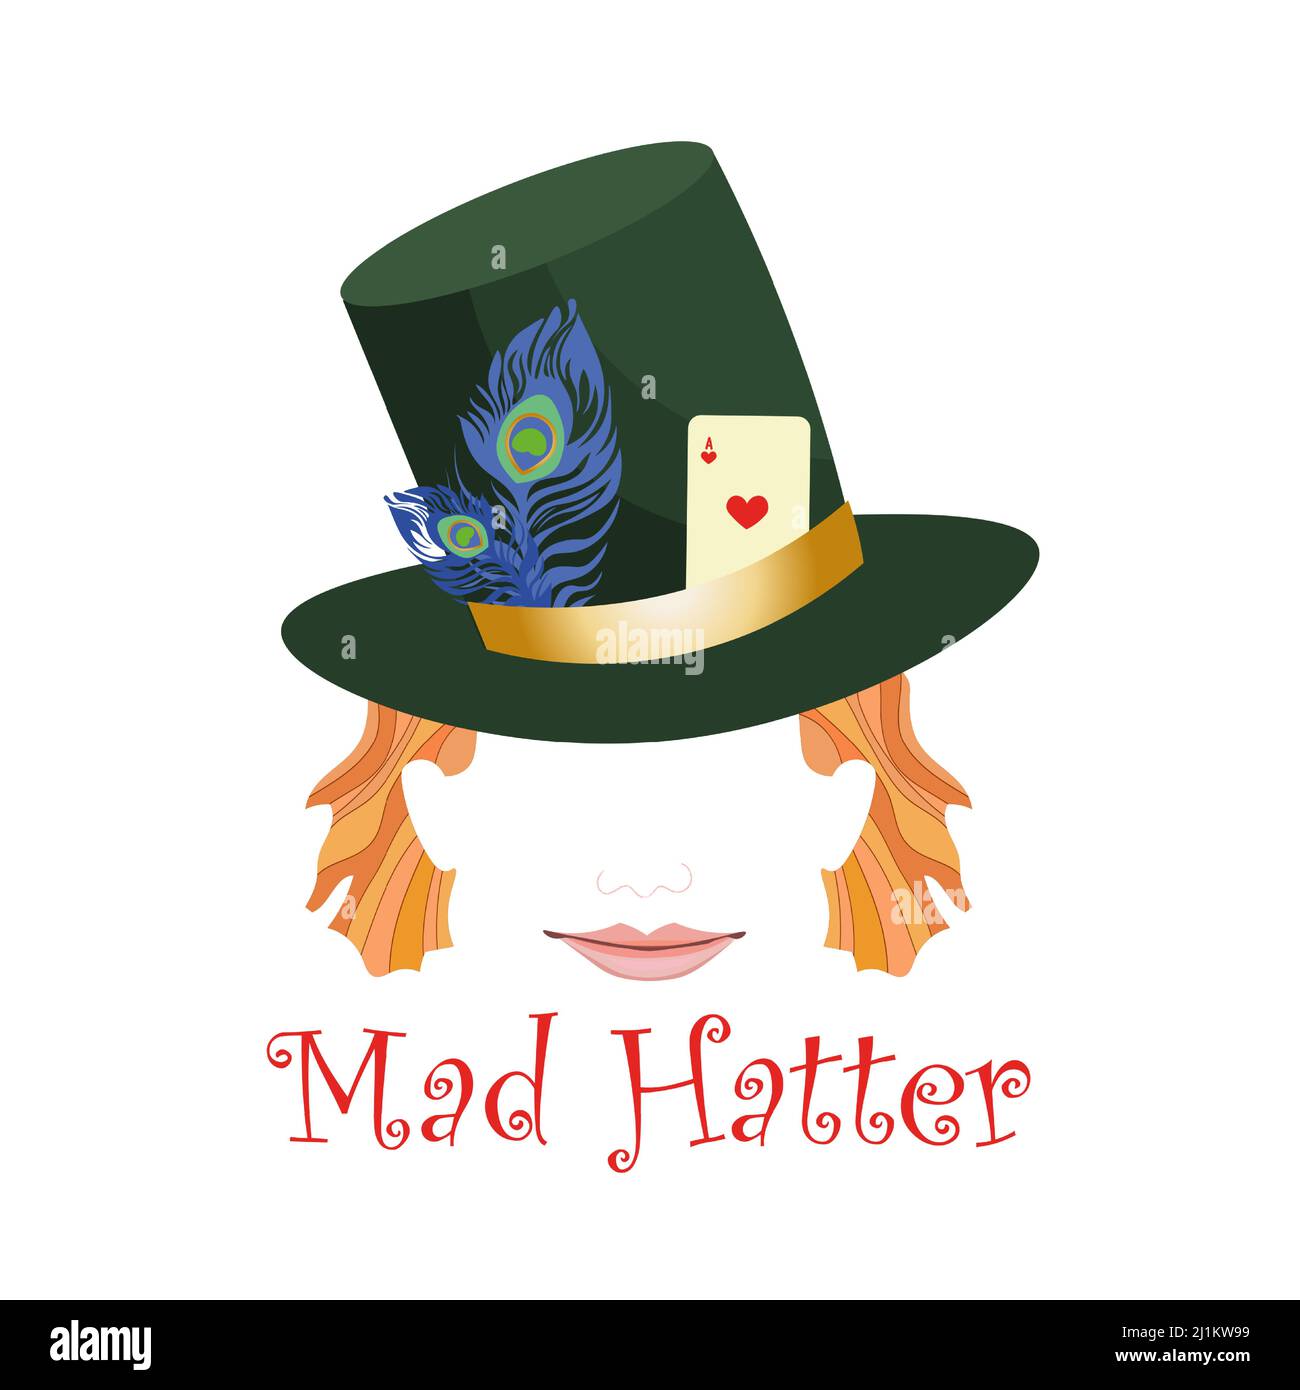 Abstract mad hatter head wearing hat decorated with playing card and feathers. Redheared smiling face. Vector illustration. Stock Vector